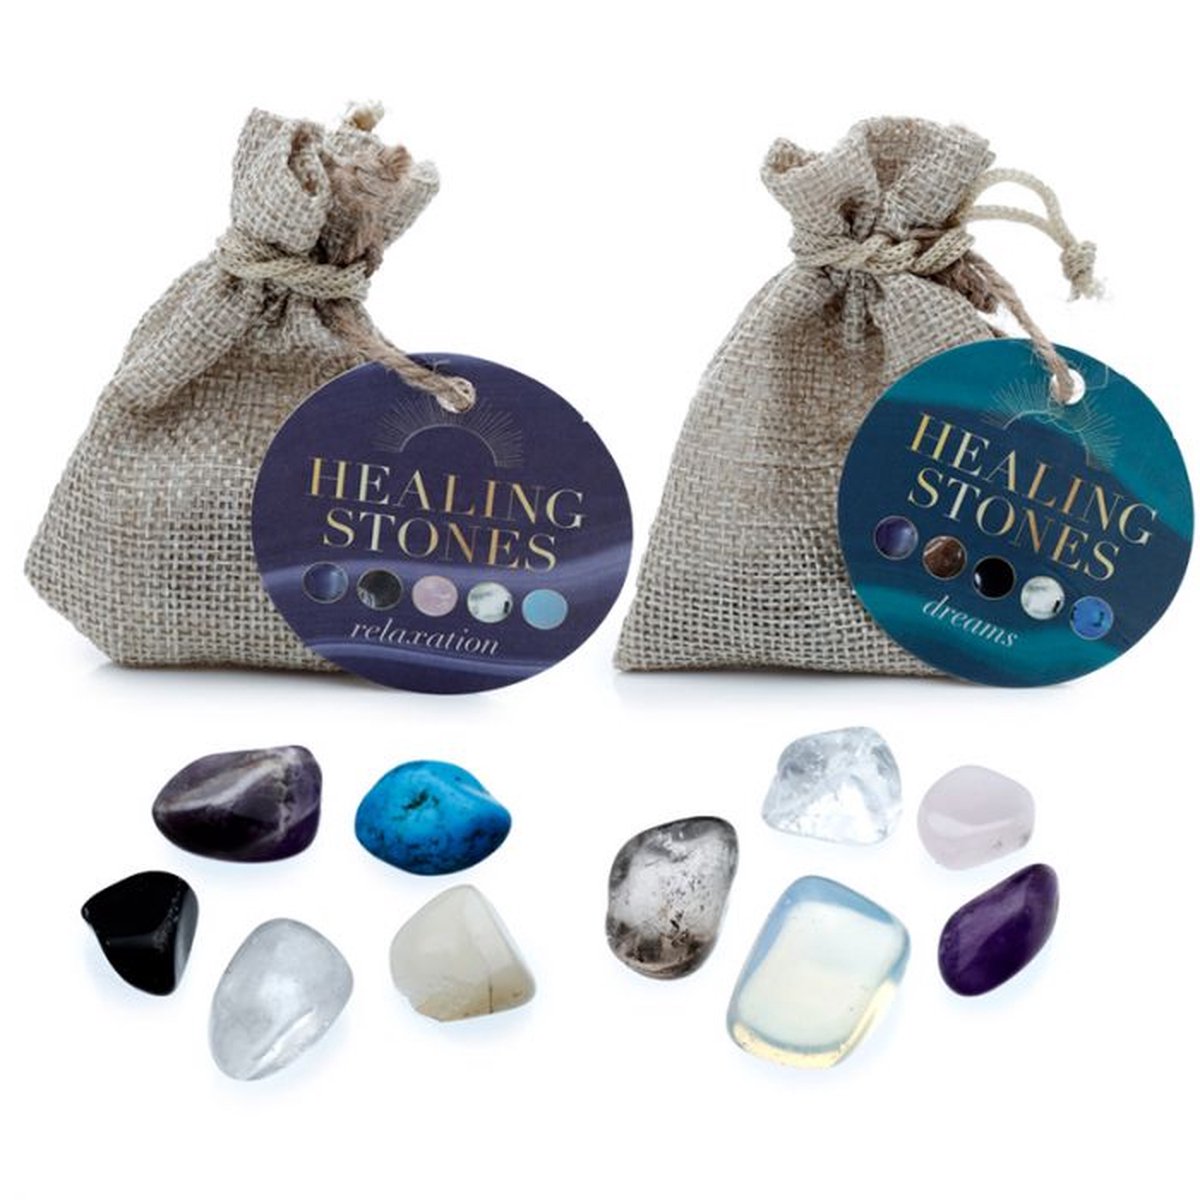 Healing stones, helende stenen, relaxation and dreams